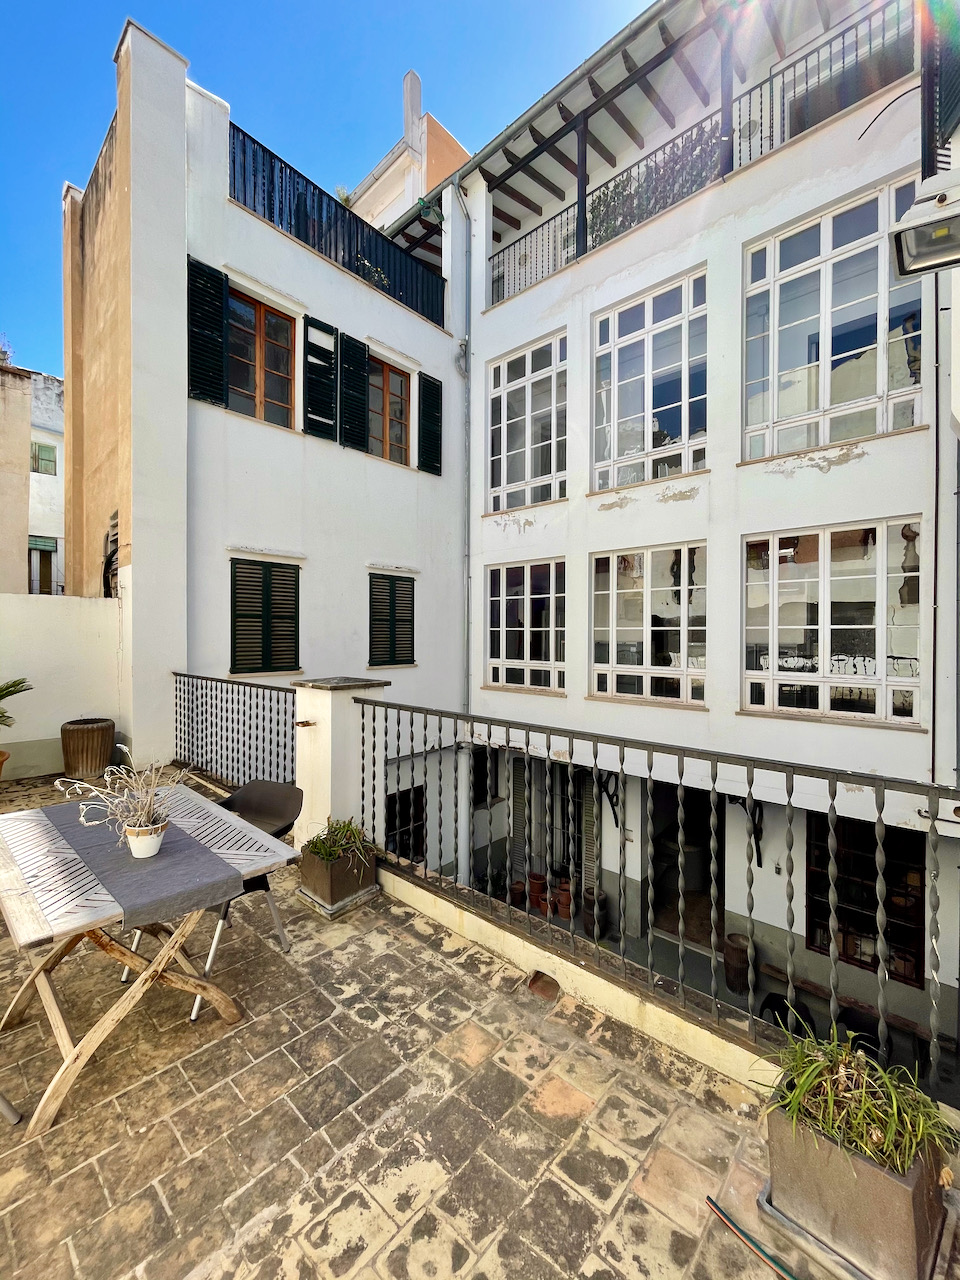 Elegant and luminous home with own courtyard in the Old Town of Palma de Mallorca.